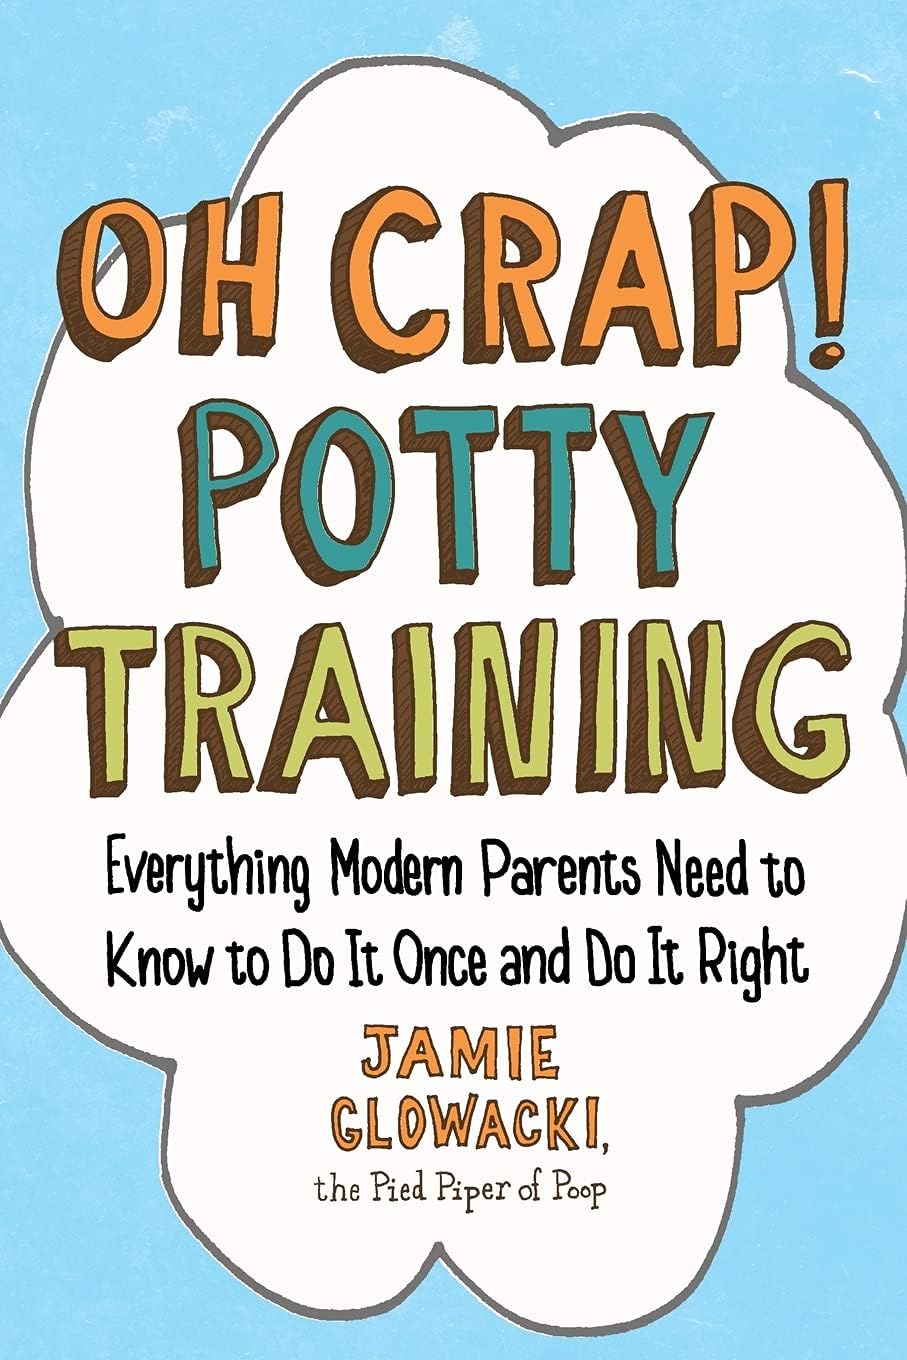 Oh Crap! Potty Training: Everything Modern Parents Need to Know to Do It Once and Do It Right (1) Review